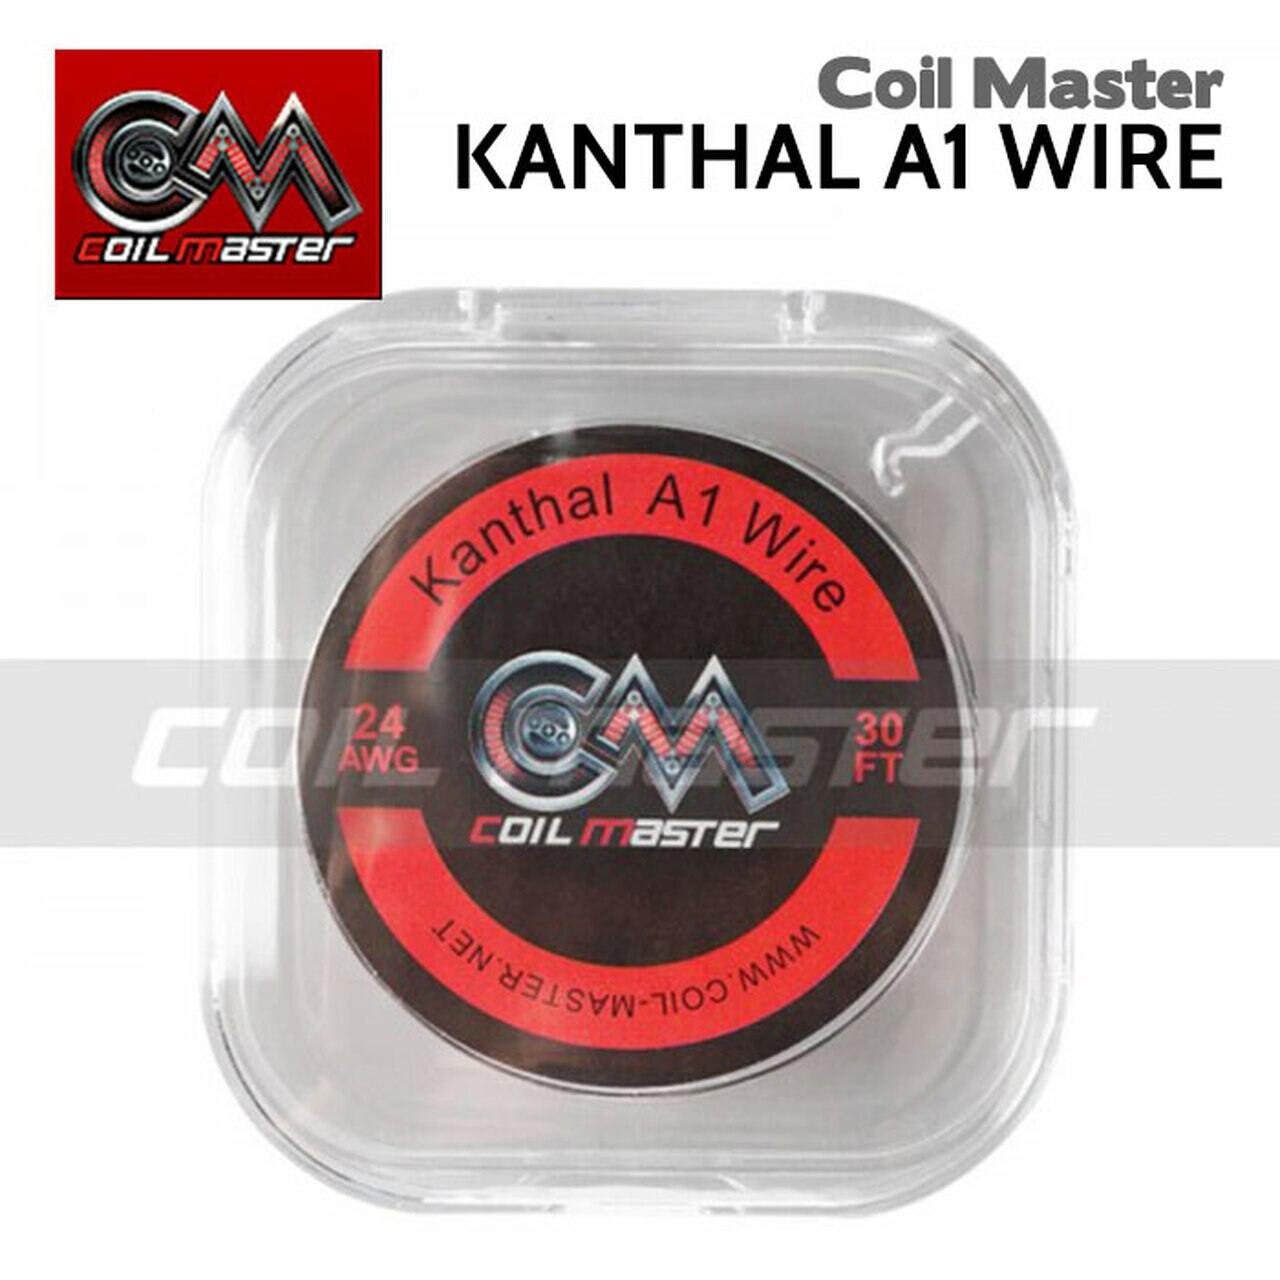 A1 Wire